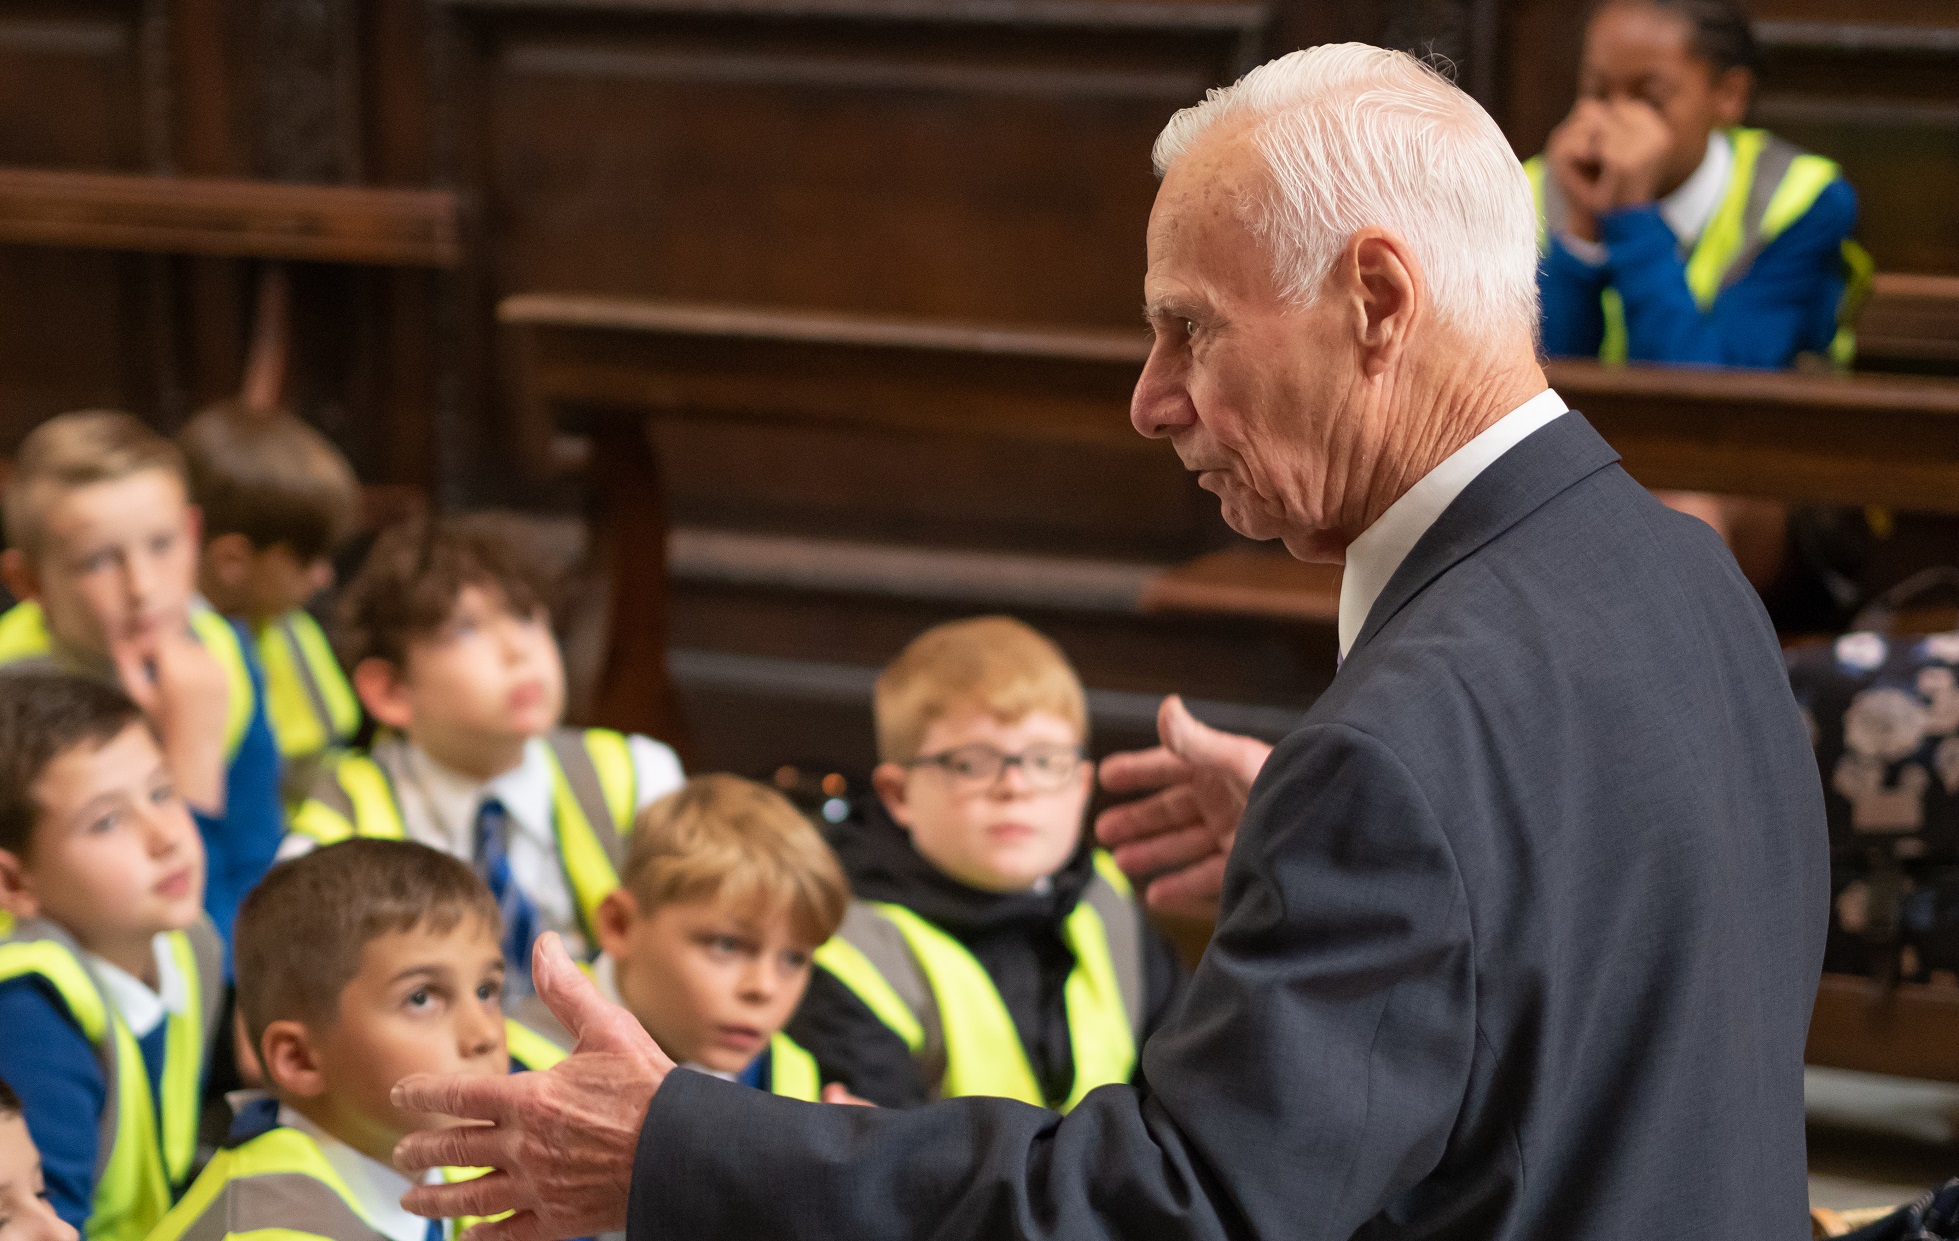 An elderly man talking to a group of primary school children in the cathedral